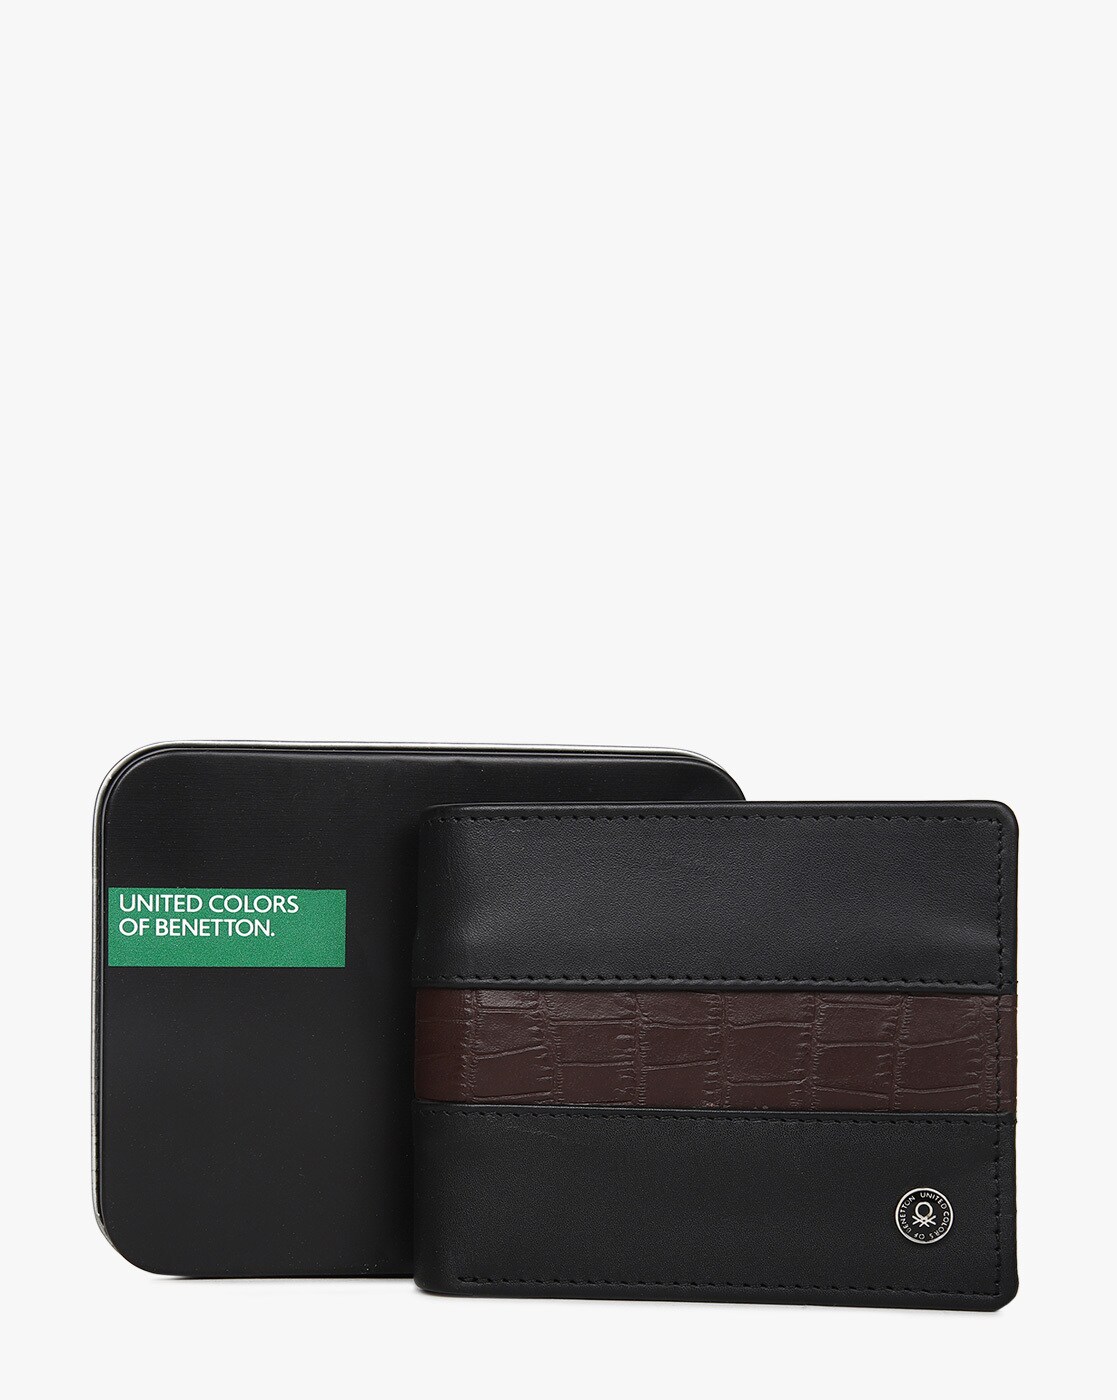 buy black wallets for men by united colors of benetton online ajio com